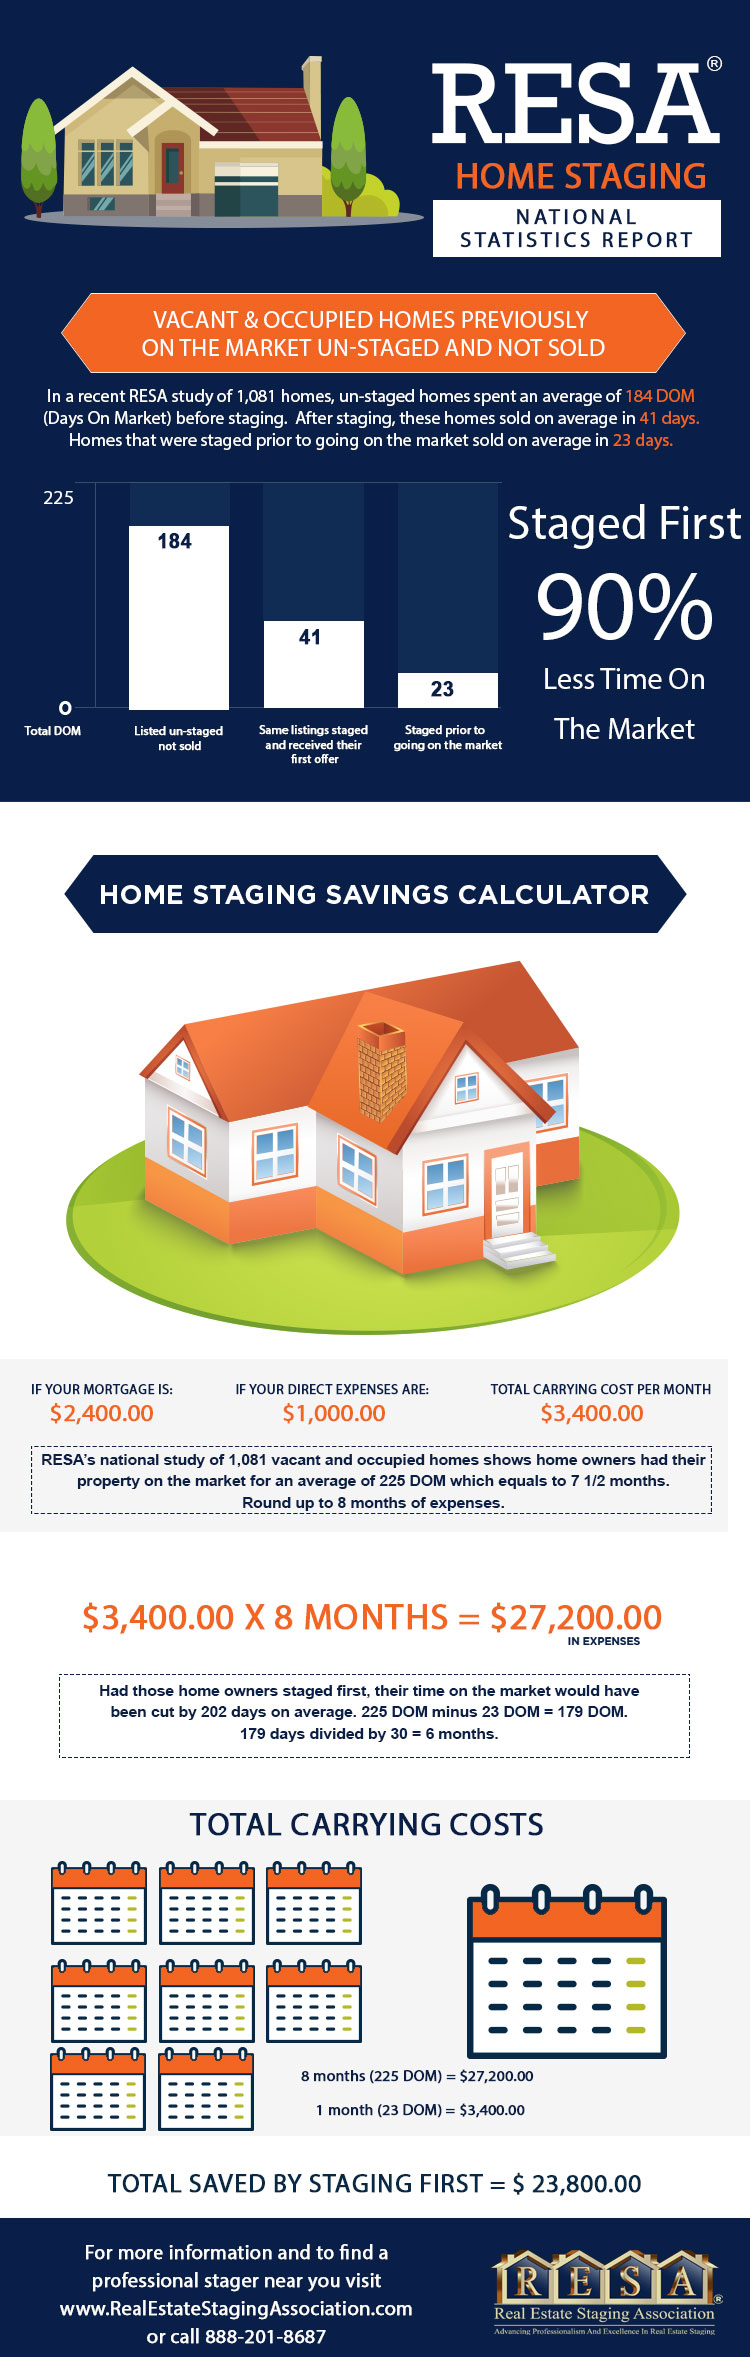 Statistics prove home staging works